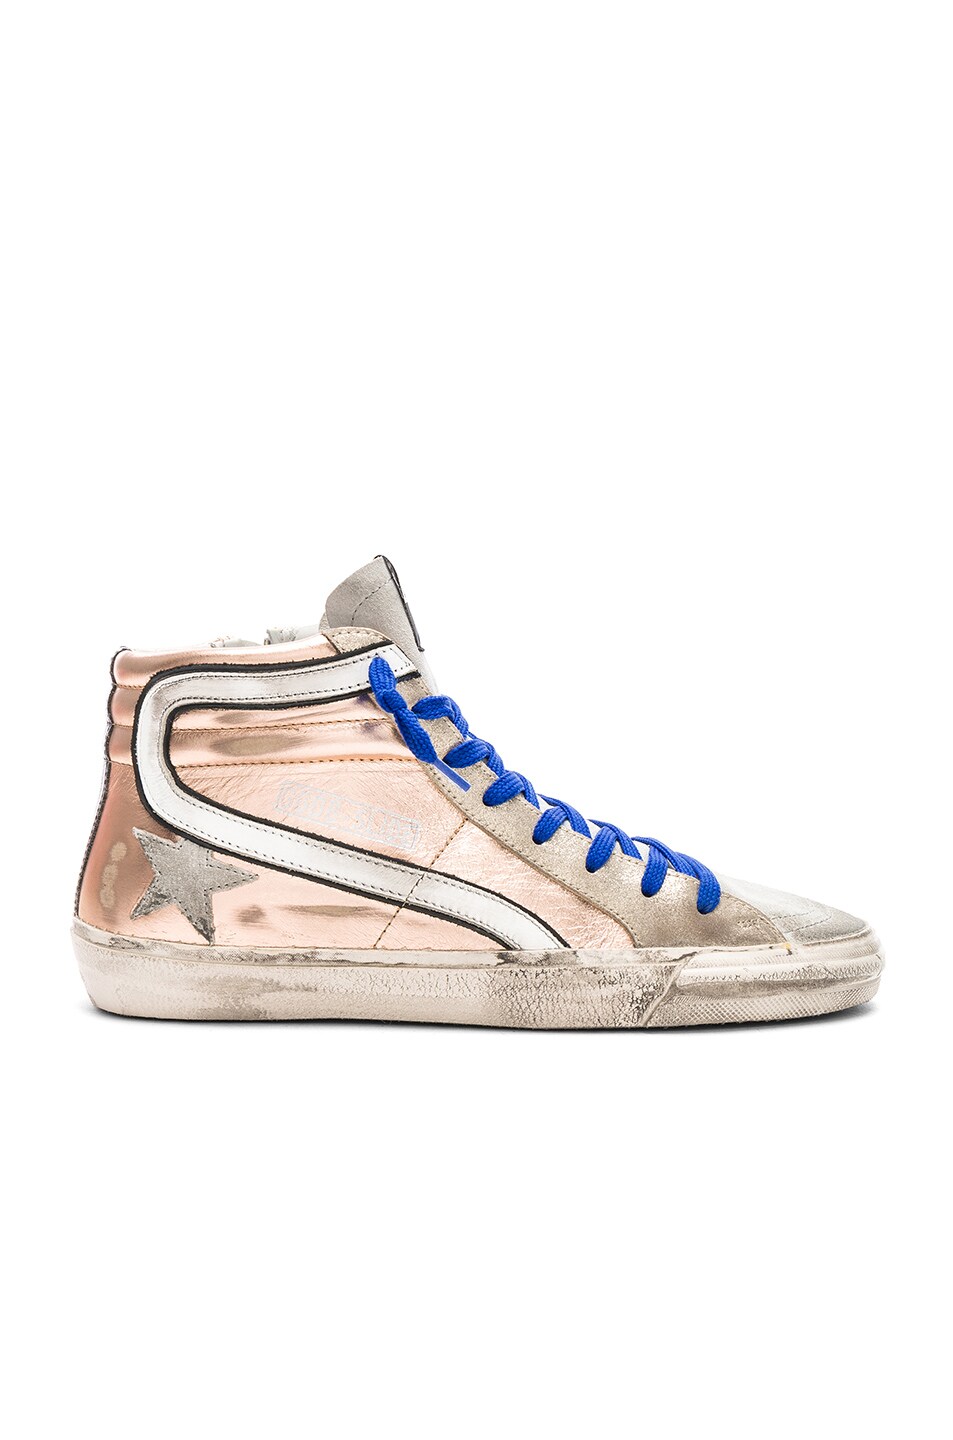 Image 1 of Golden Goose Laminated Slide Sneakers in Rose Gold & Ice